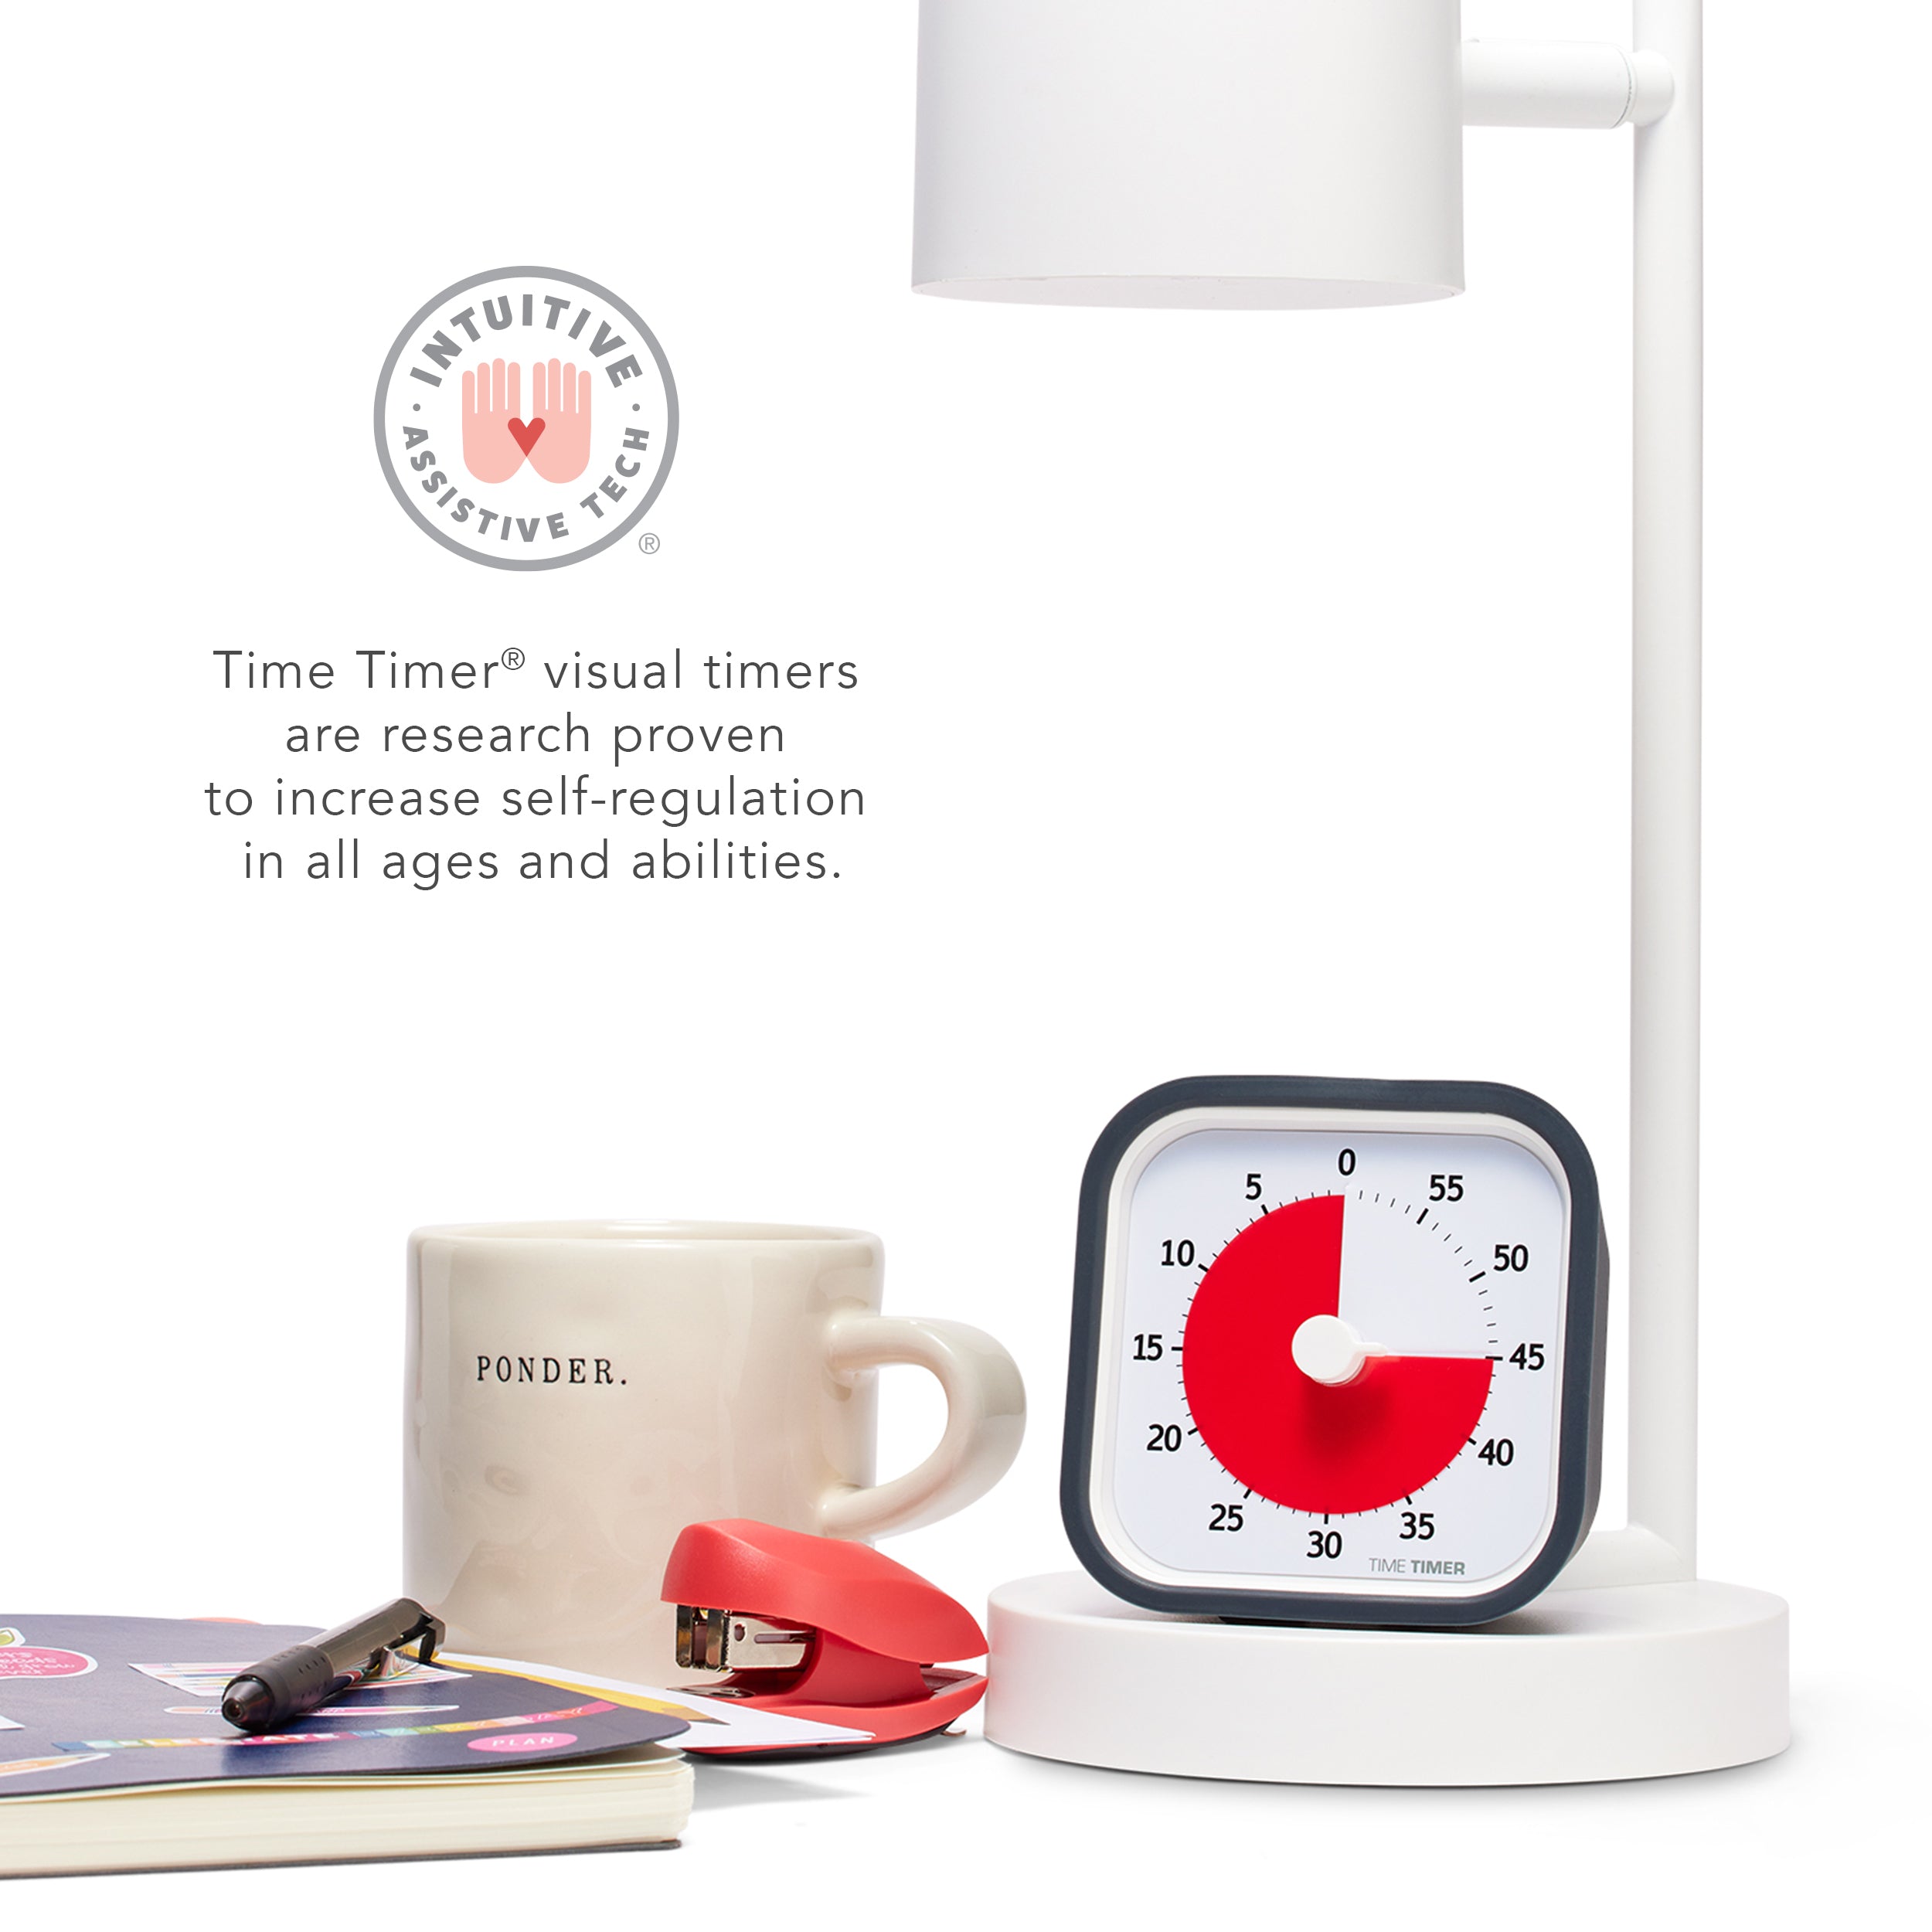 The Time Timer MOD 60 Minute Visual Timer is shown sitting under a desk lamp next to other office and teacher supplies. There is a icon that states "Intuitive Assistive Tech" and it reads "Time Timer visual timers are research proven to increase self-regulation in all ages and abilities."